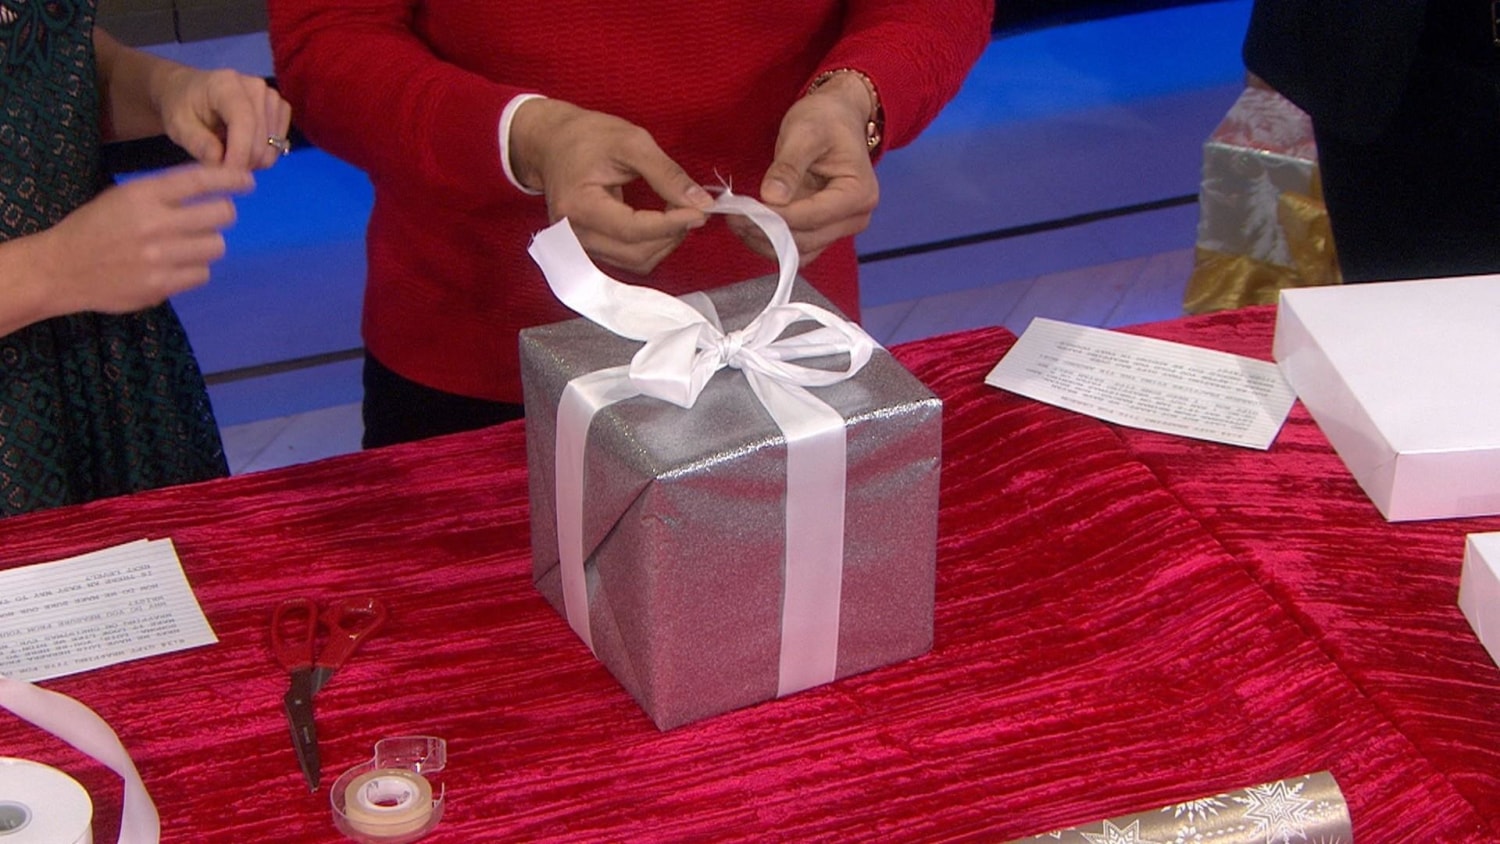 Everything you need to wrap gifts like a professional - Reviewed